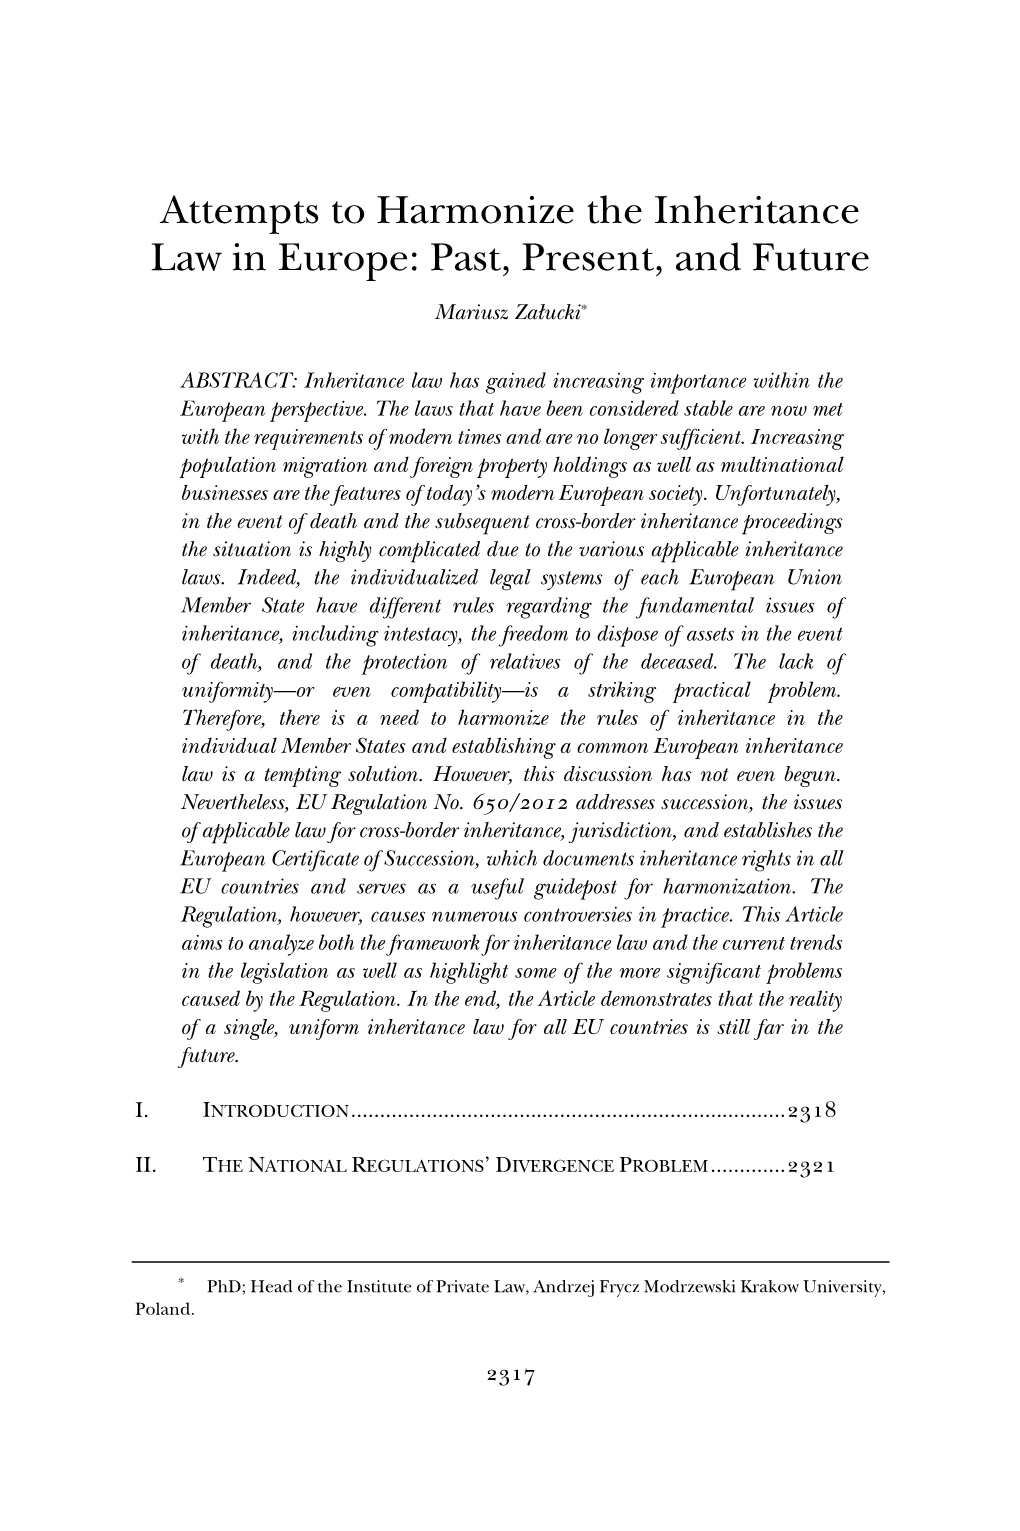 Attempts to Harmonize the Inheritance Law in Europe: Past, Present, and Future